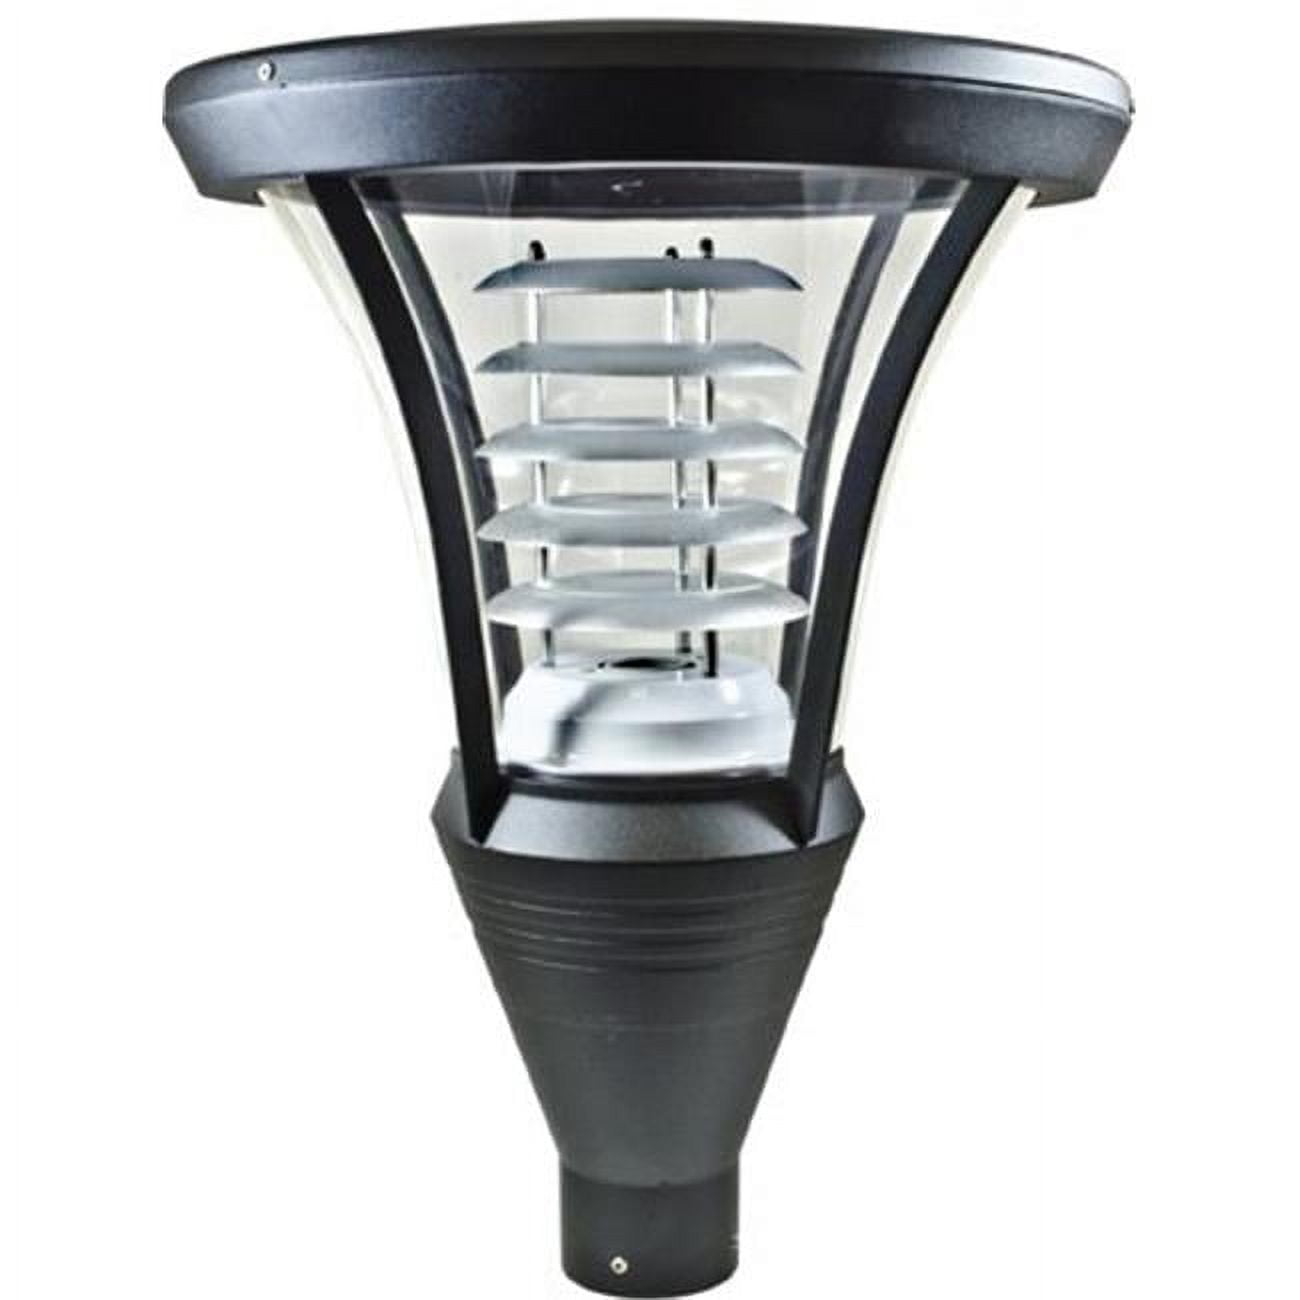 Picture of Dabmar Lighting GM643-B 70W 120V Powder Coated Cast Aluminum Post Top Light Fixture with High Pressure Sodium Lamp, Black - 22.75 x 17.25 x 17.25 in.